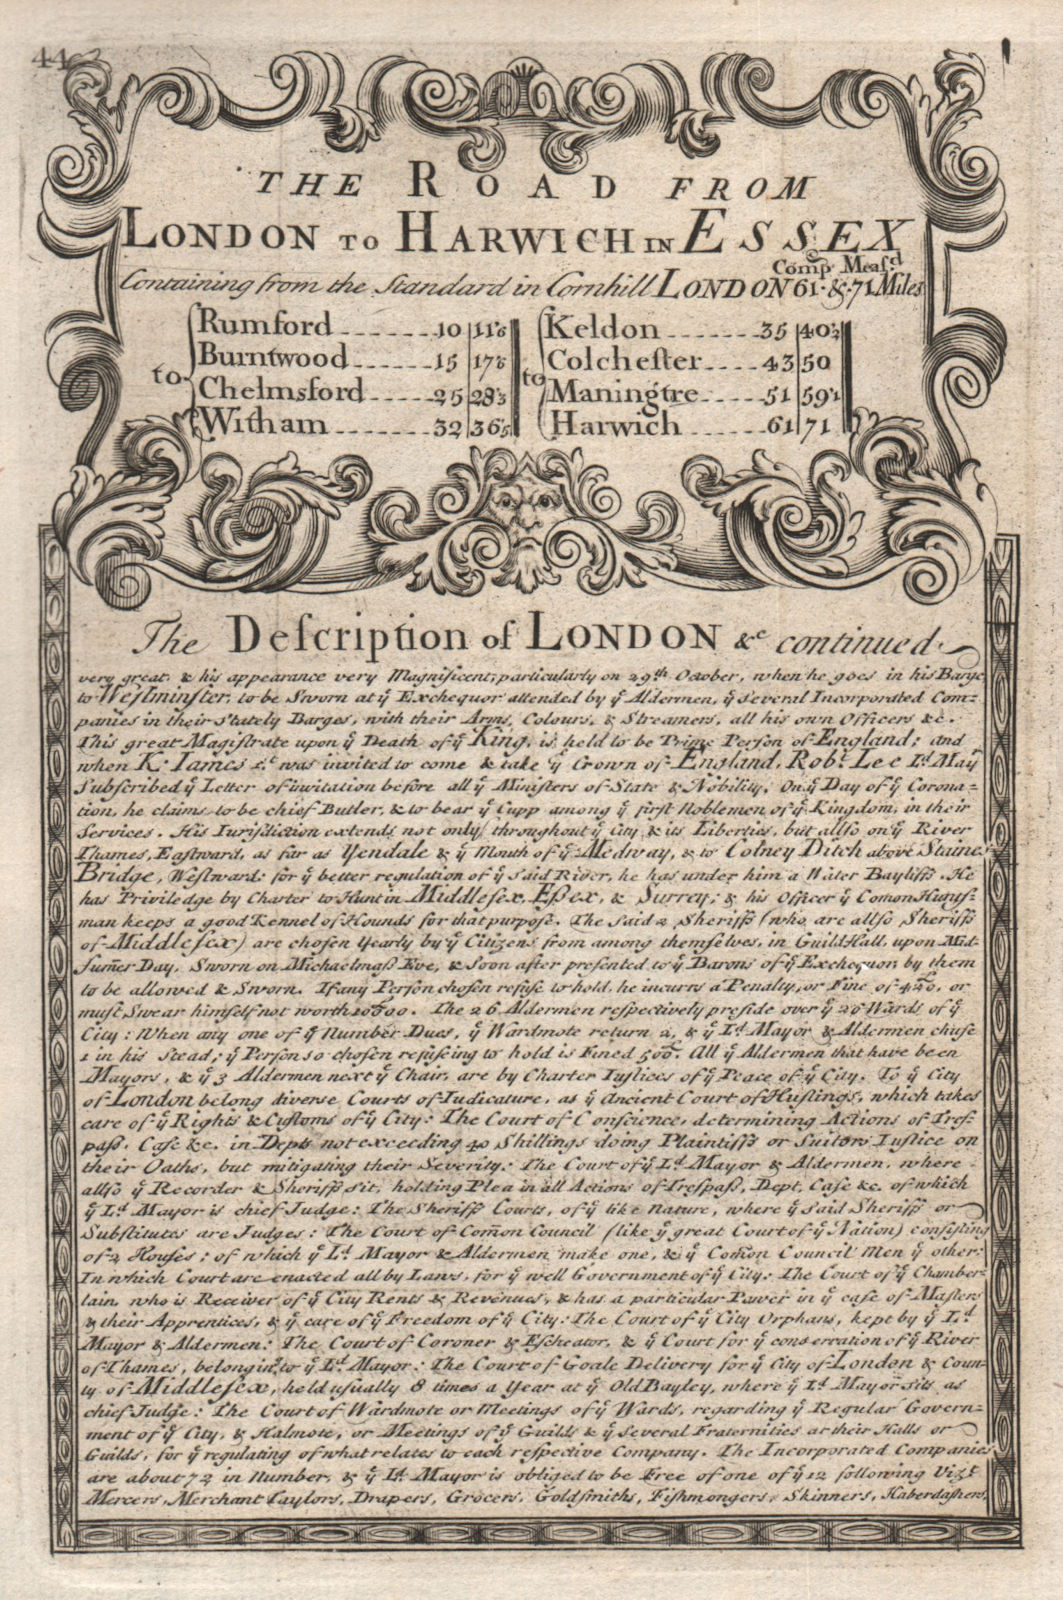 Associate Product The Road from London to Harwich in Essex. The Description of London cont'd 1753